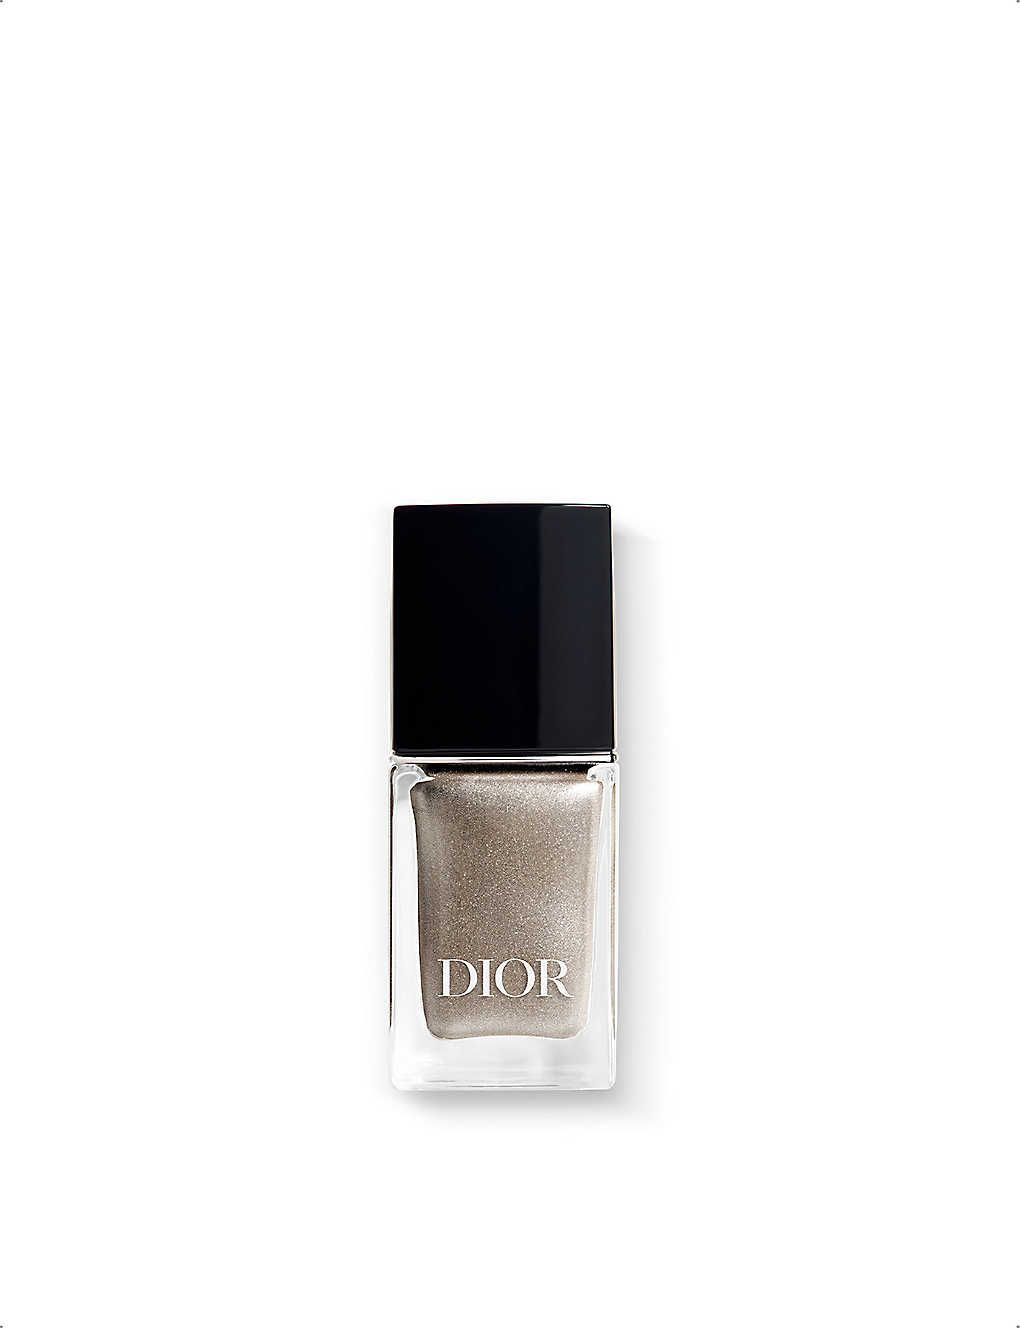 DIOR The Atelier of Dreams Dior Vernis limited-edition nail polish 10ml | Selfridges